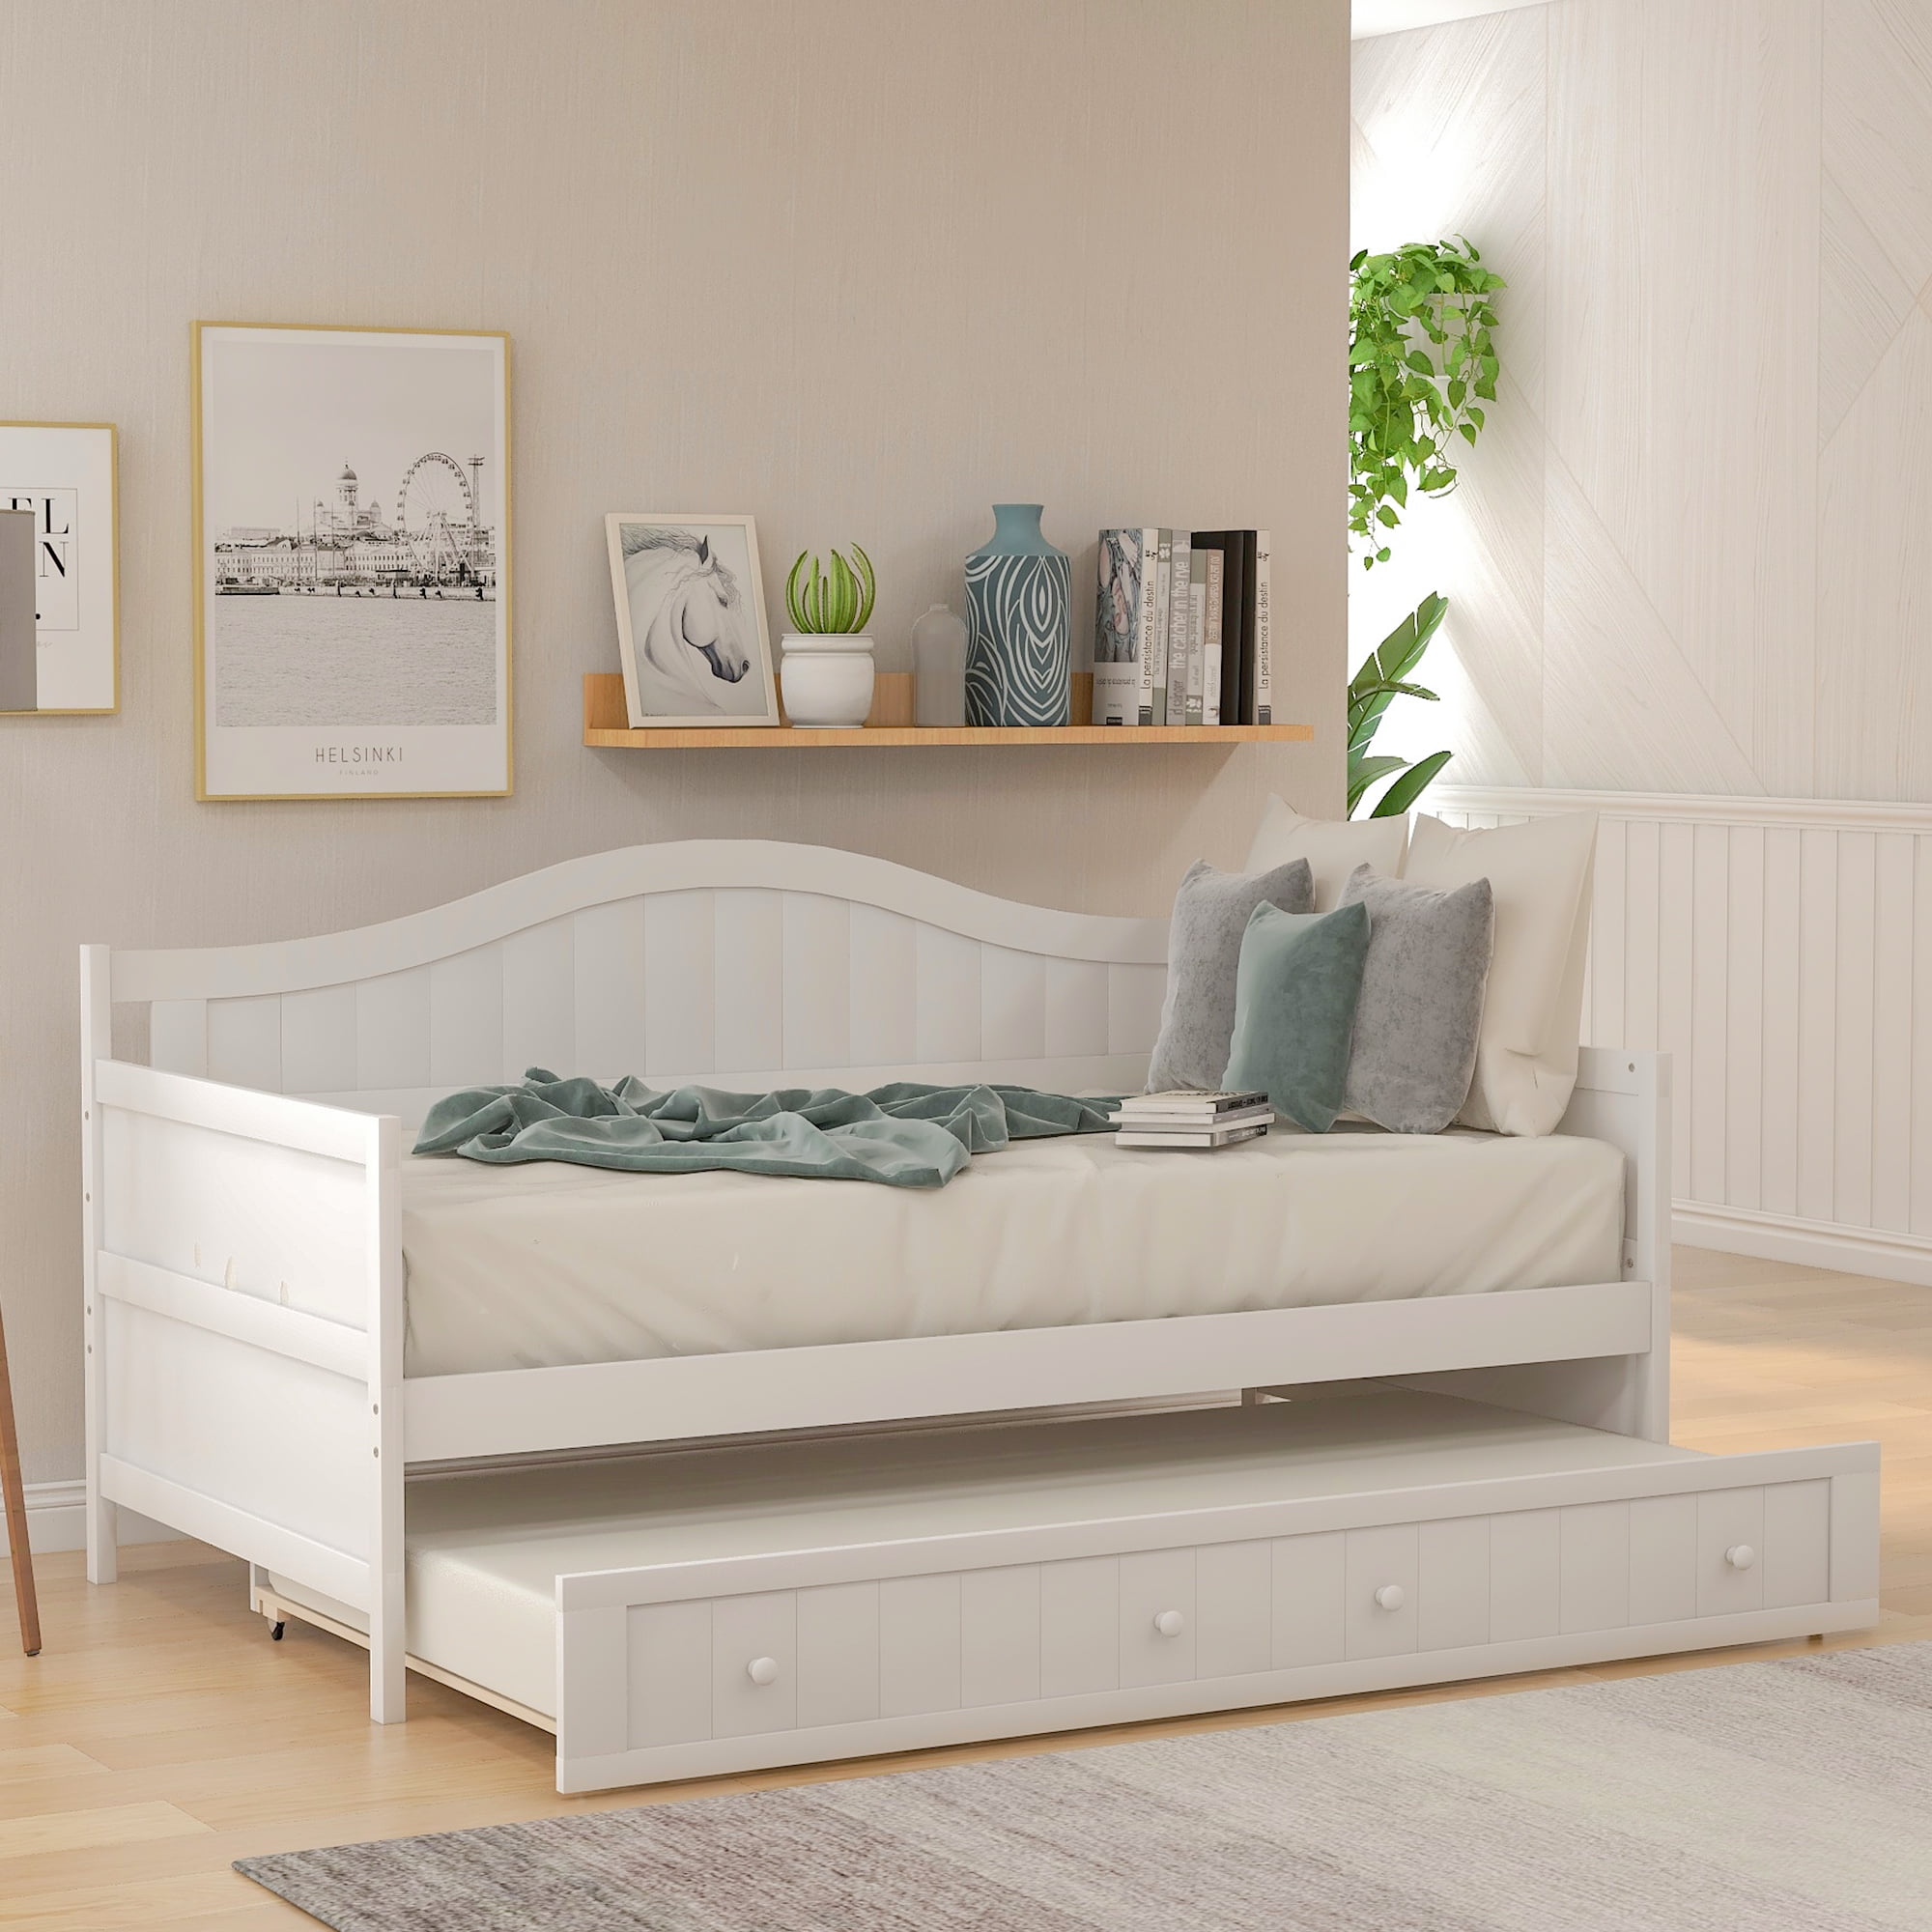 Details about   Twin Size Daybed Bed For Home Living Room Bedroom Fashion US Stock 